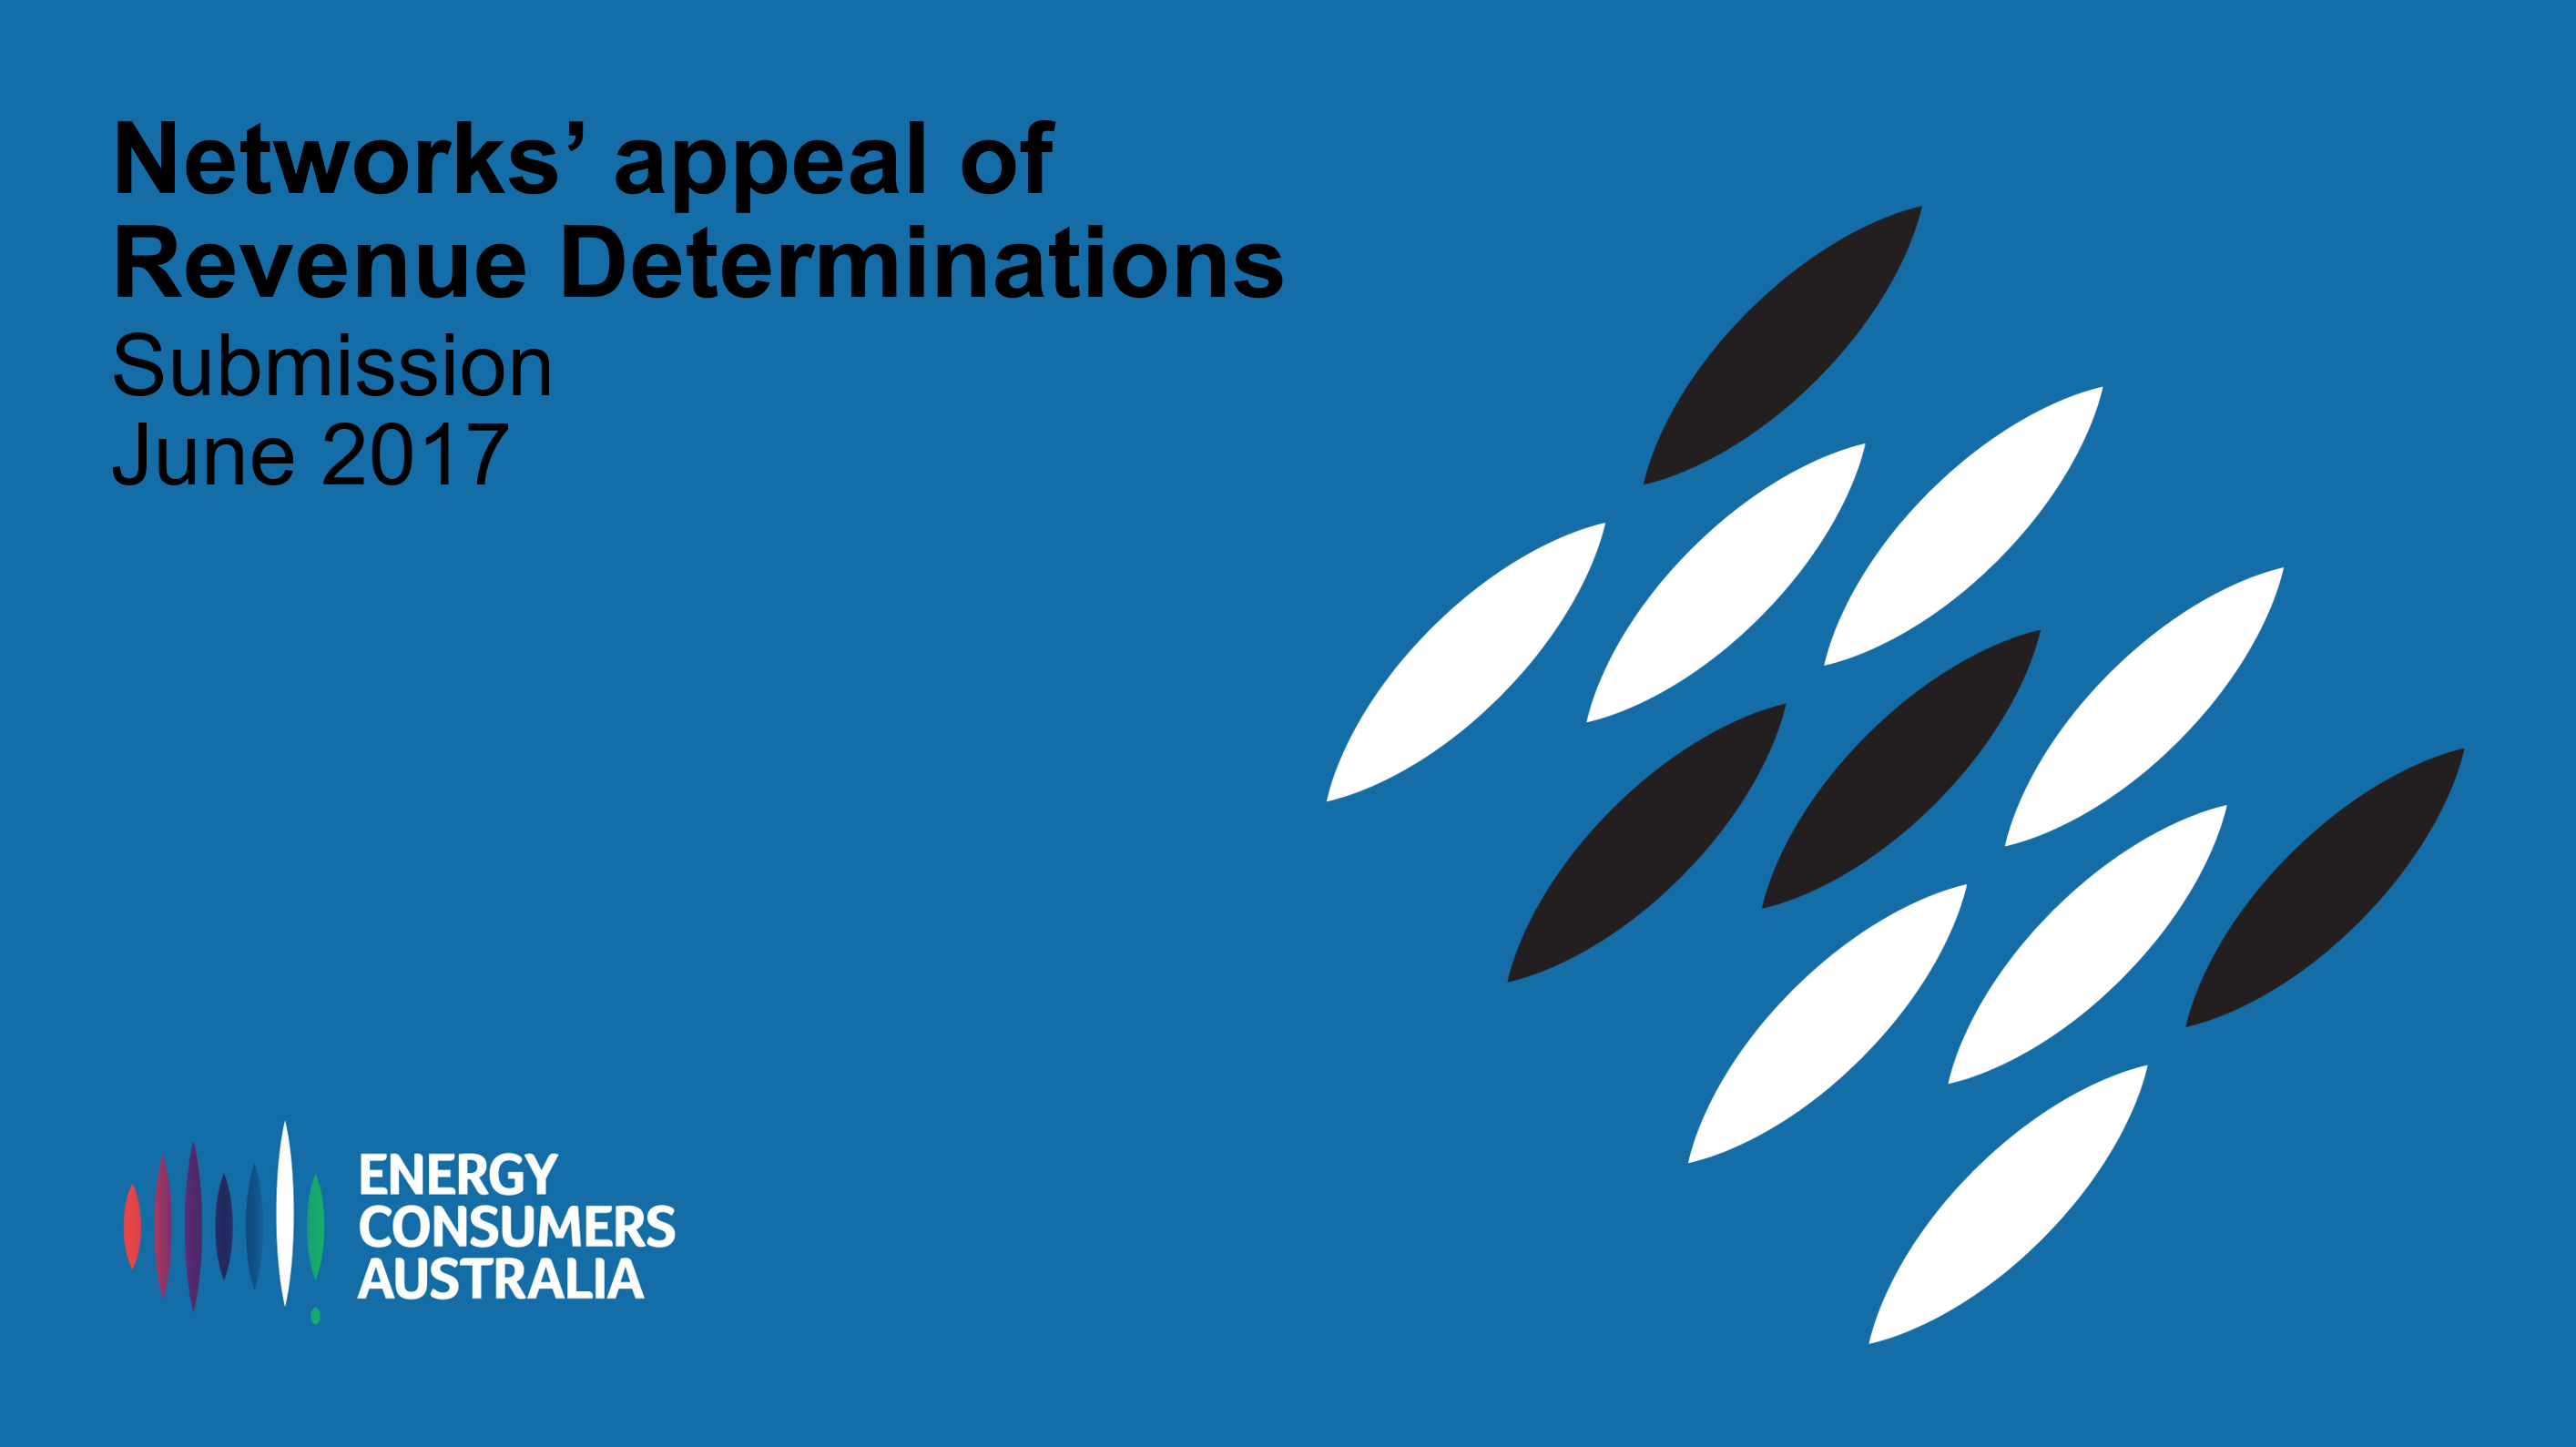 Networks' appeal of Revenue Determinations: Submission